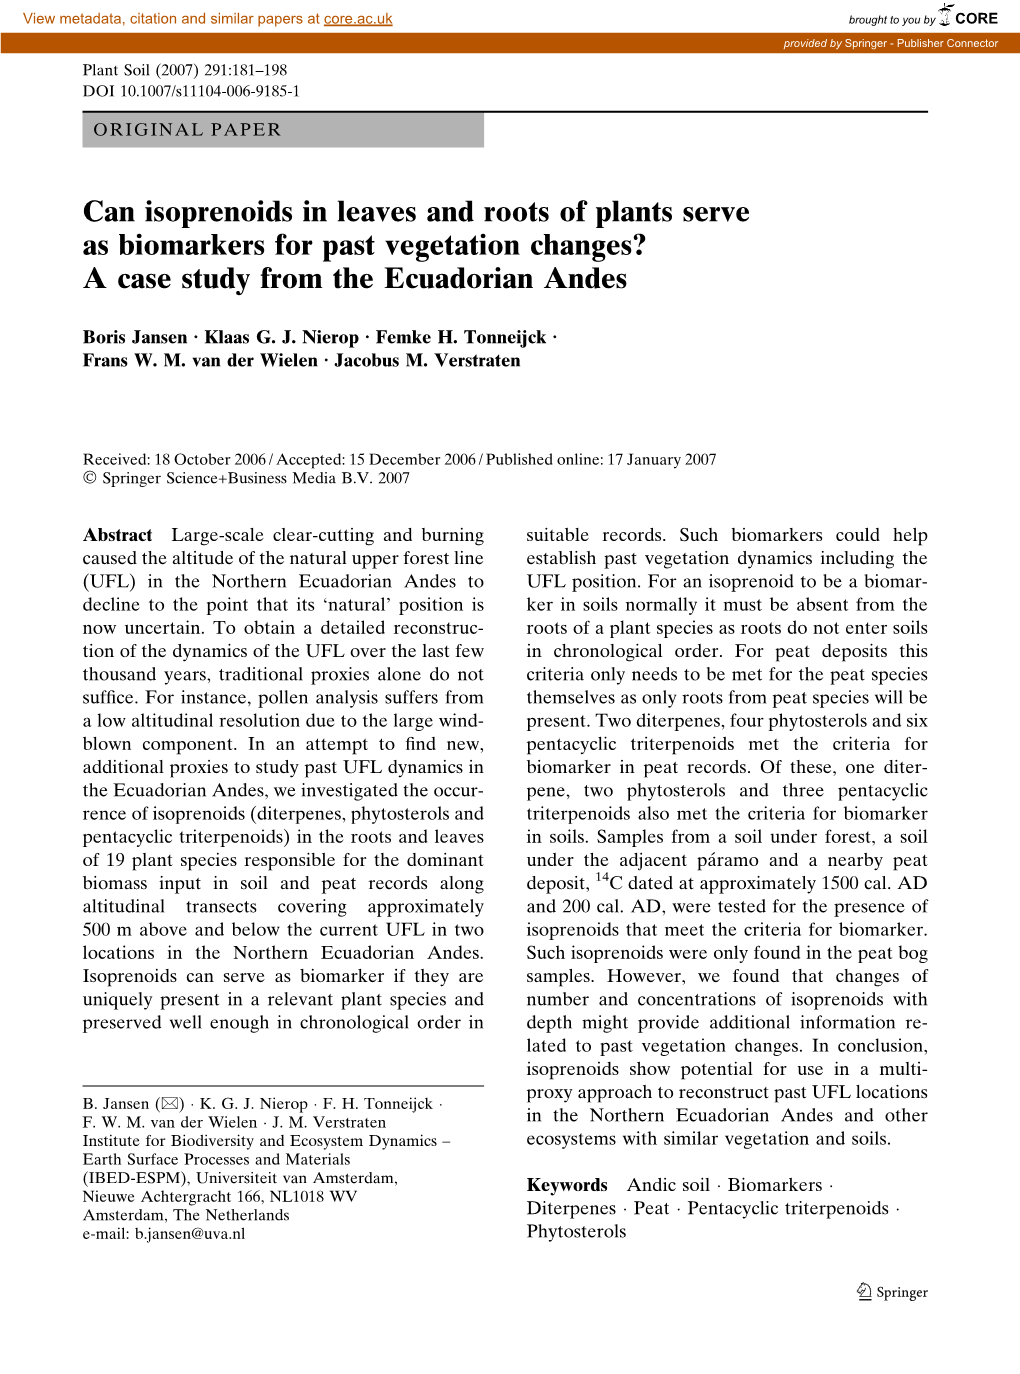 Can Isoprenoids in Leaves and Roots of Plants Serve As Biomarkers for Past Vegetation Changes? a Case Study from the Ecuadorian Andes